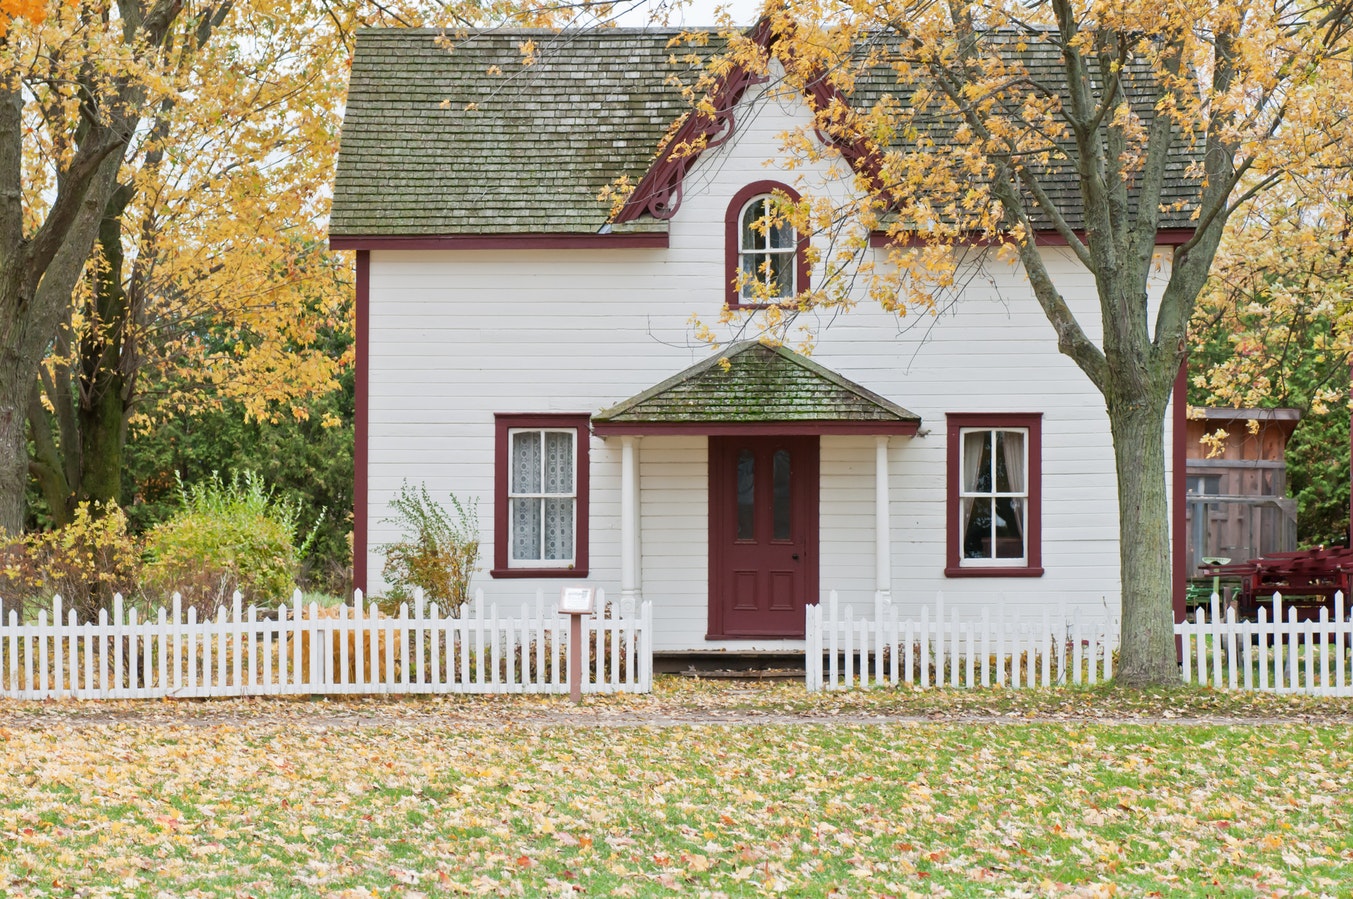 Photo of a house with a white picket fence and grass out front.